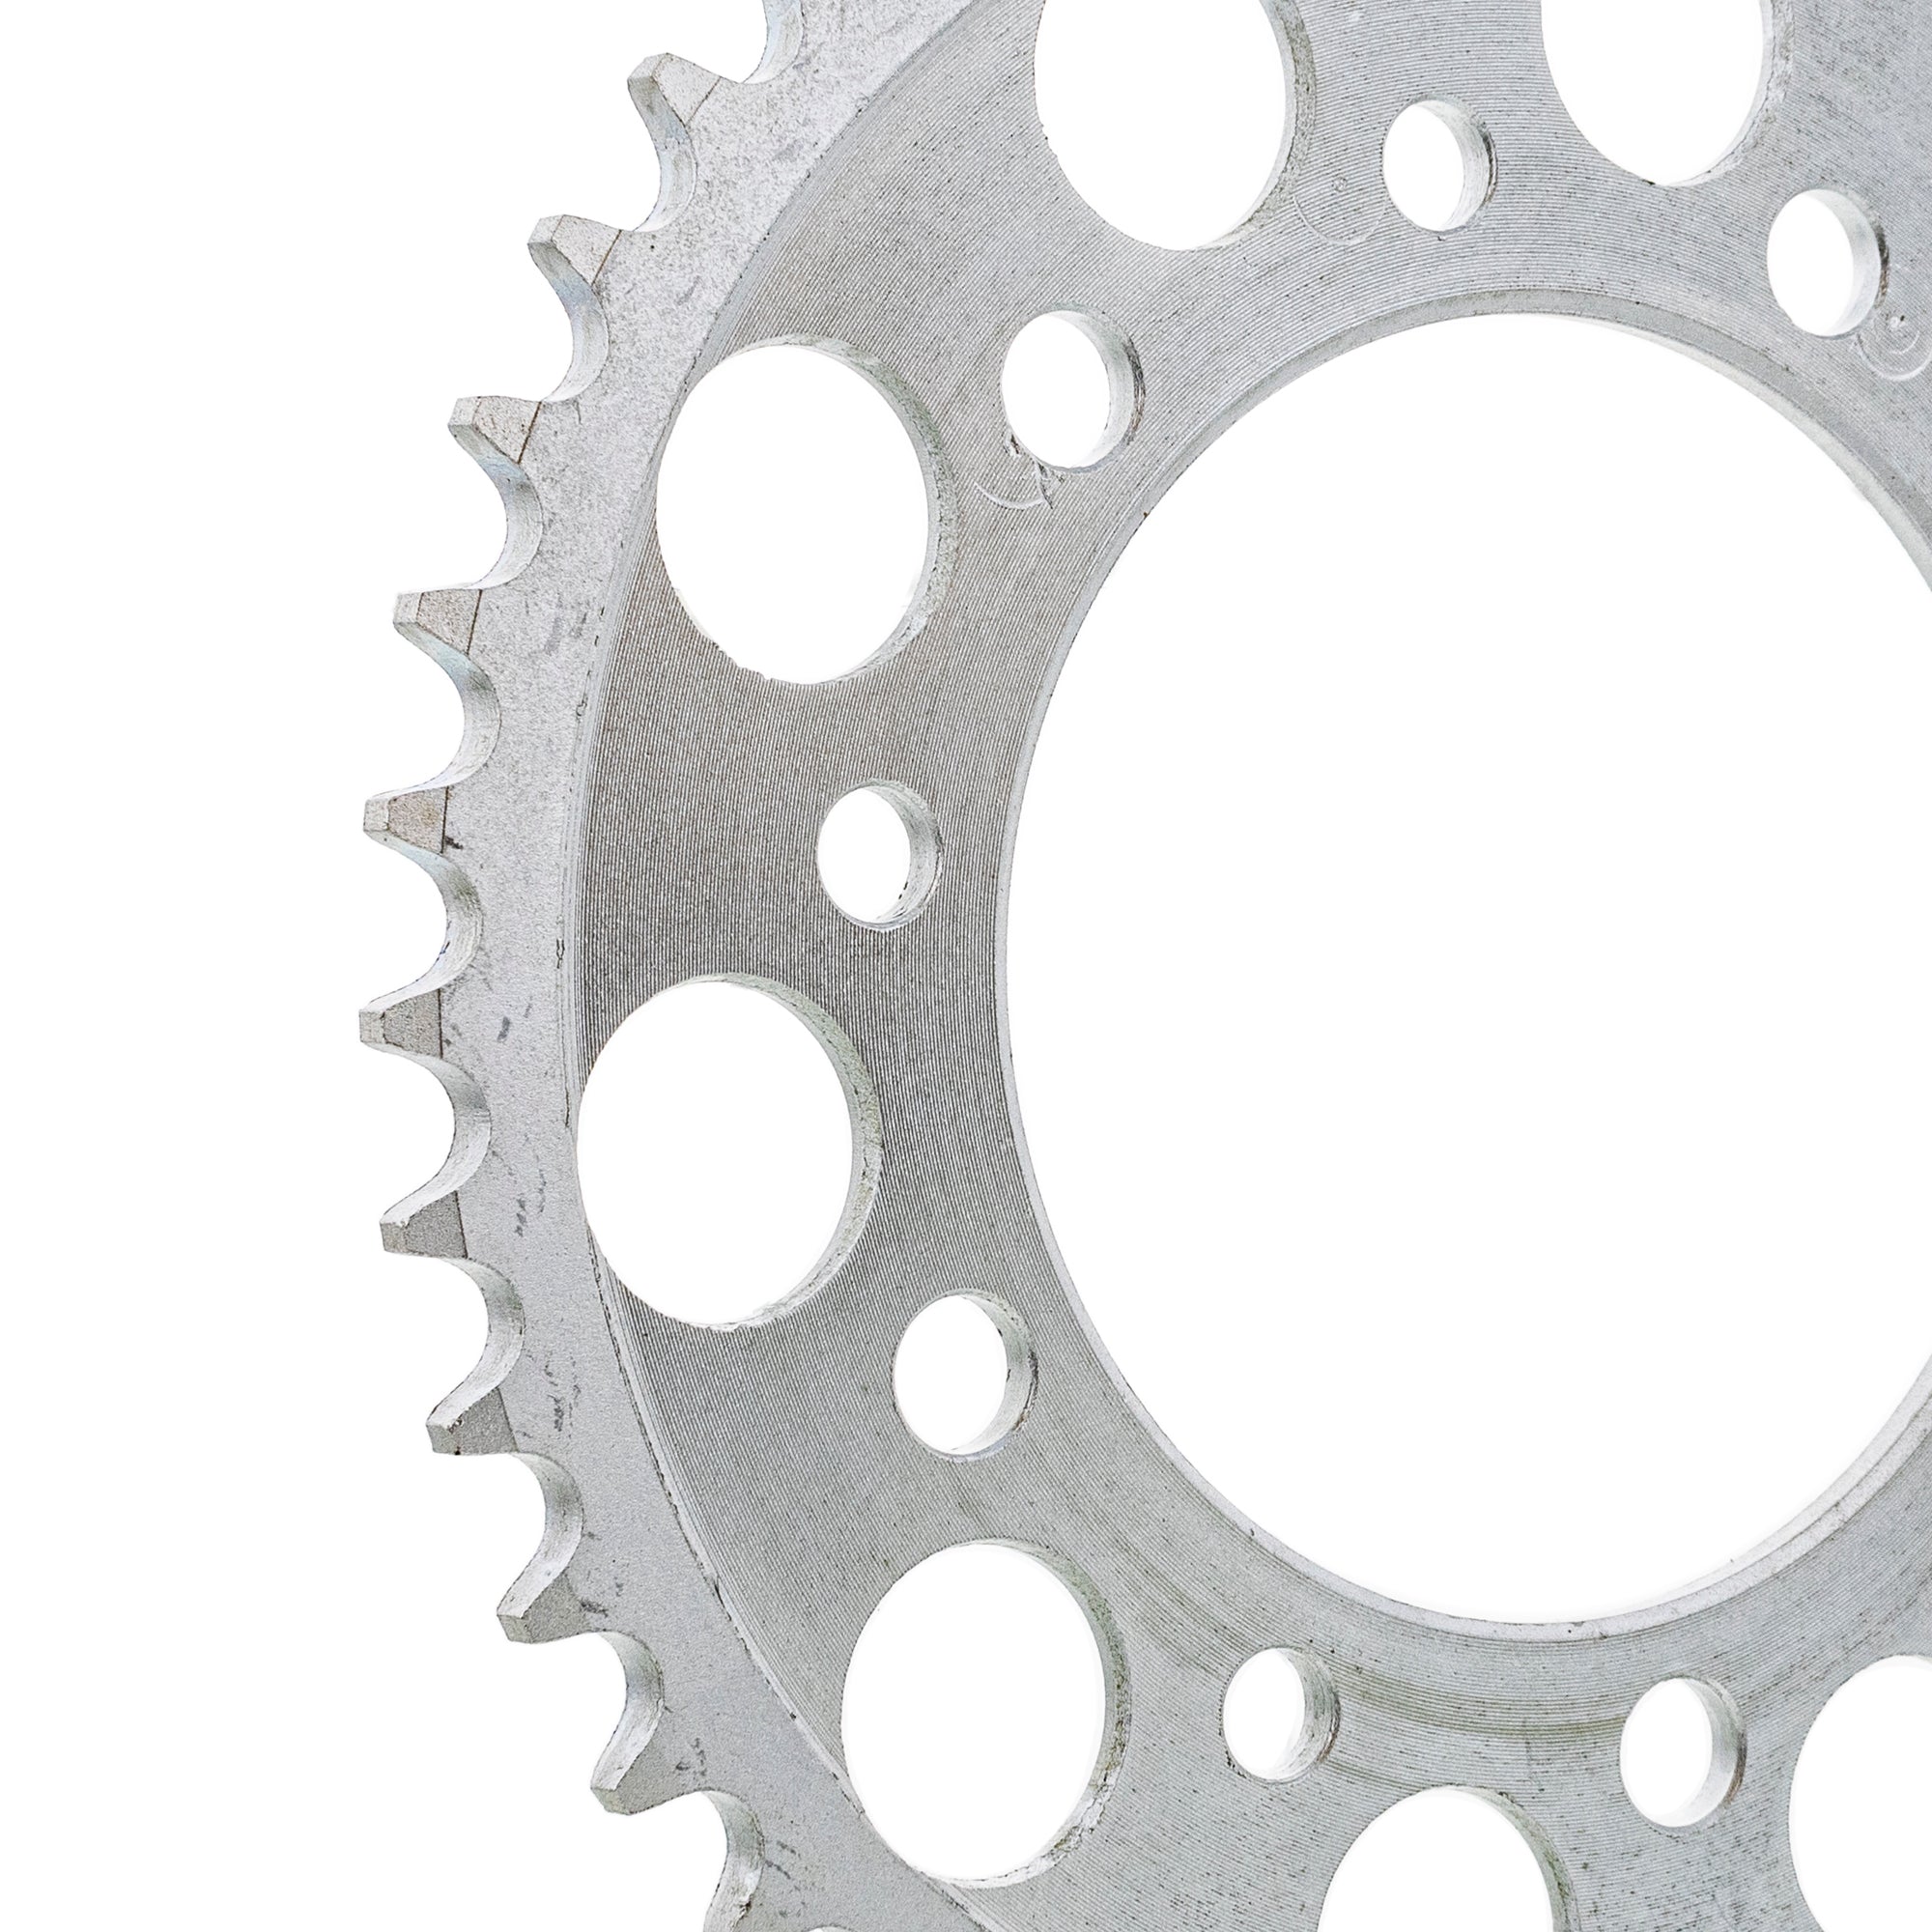 520 Pitch Front 16T Rear 44T Drive Sprocket Kit for Honda CBR600F